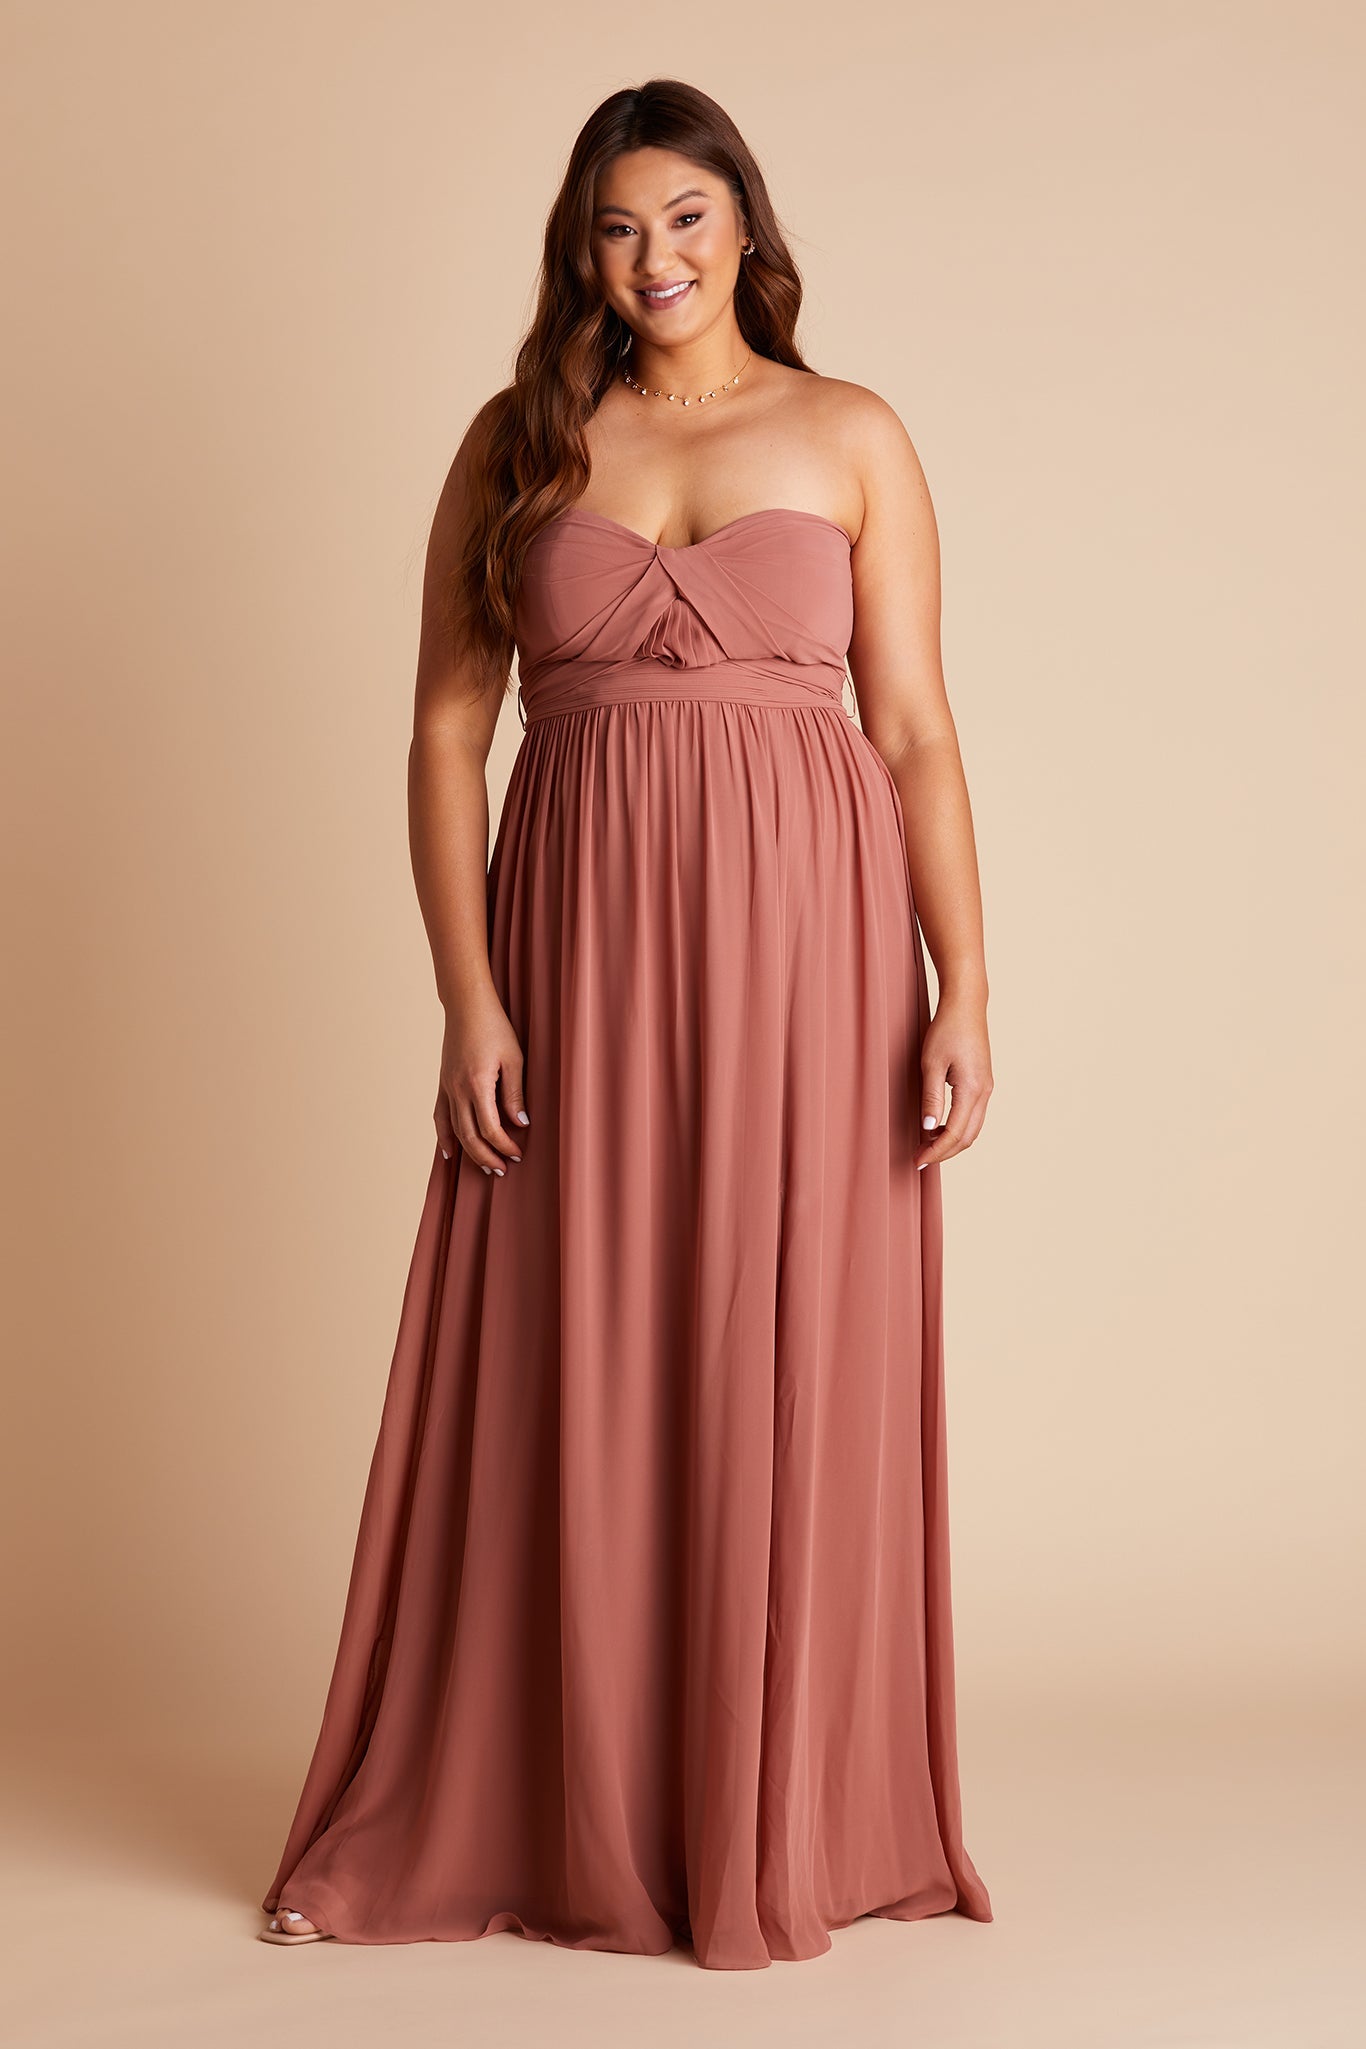 Grace convertible plus size bridesmaid dress in desert rose chiffon by Birdy Grey, front view